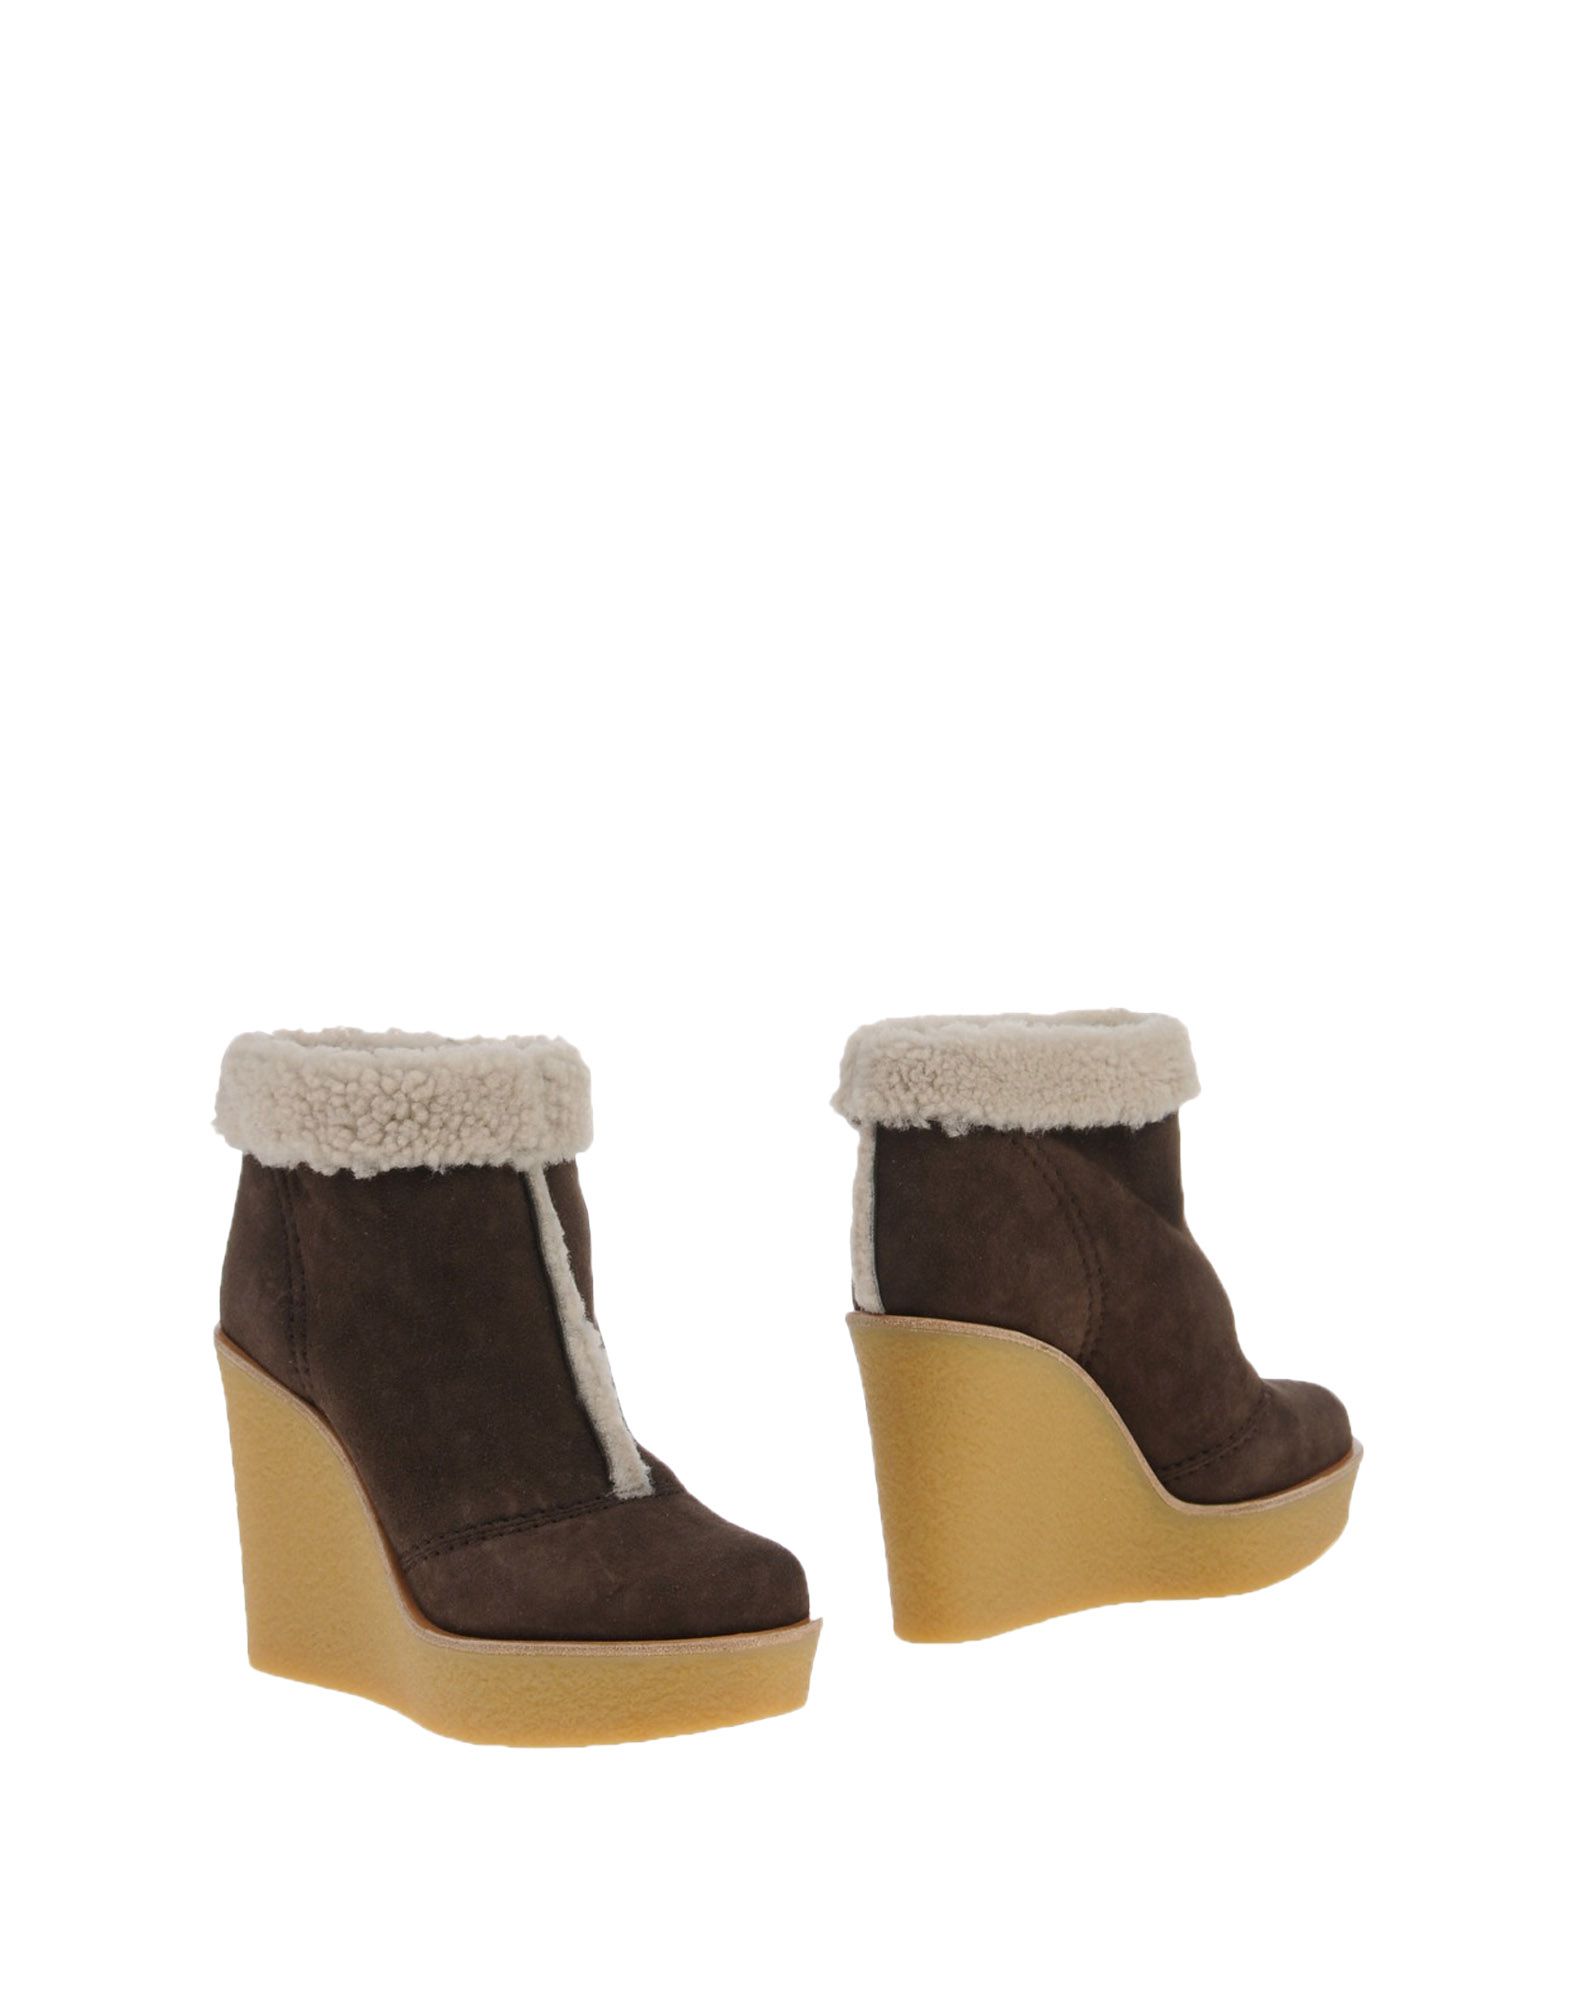 chloe ankle boots sale